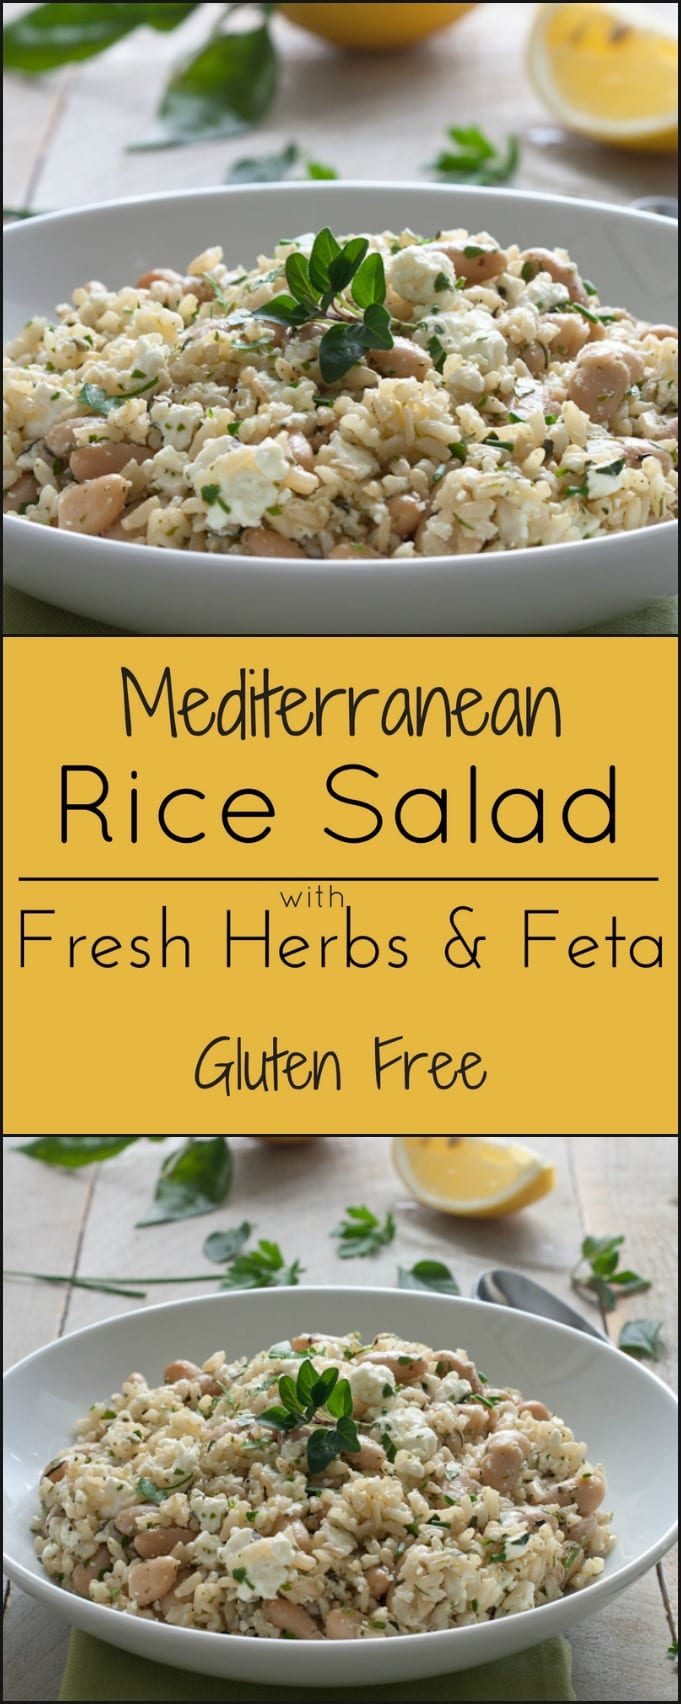 Gluten free summer side dish, Mediterranean Cold Rice Salad with Feta and Fresh herbs.